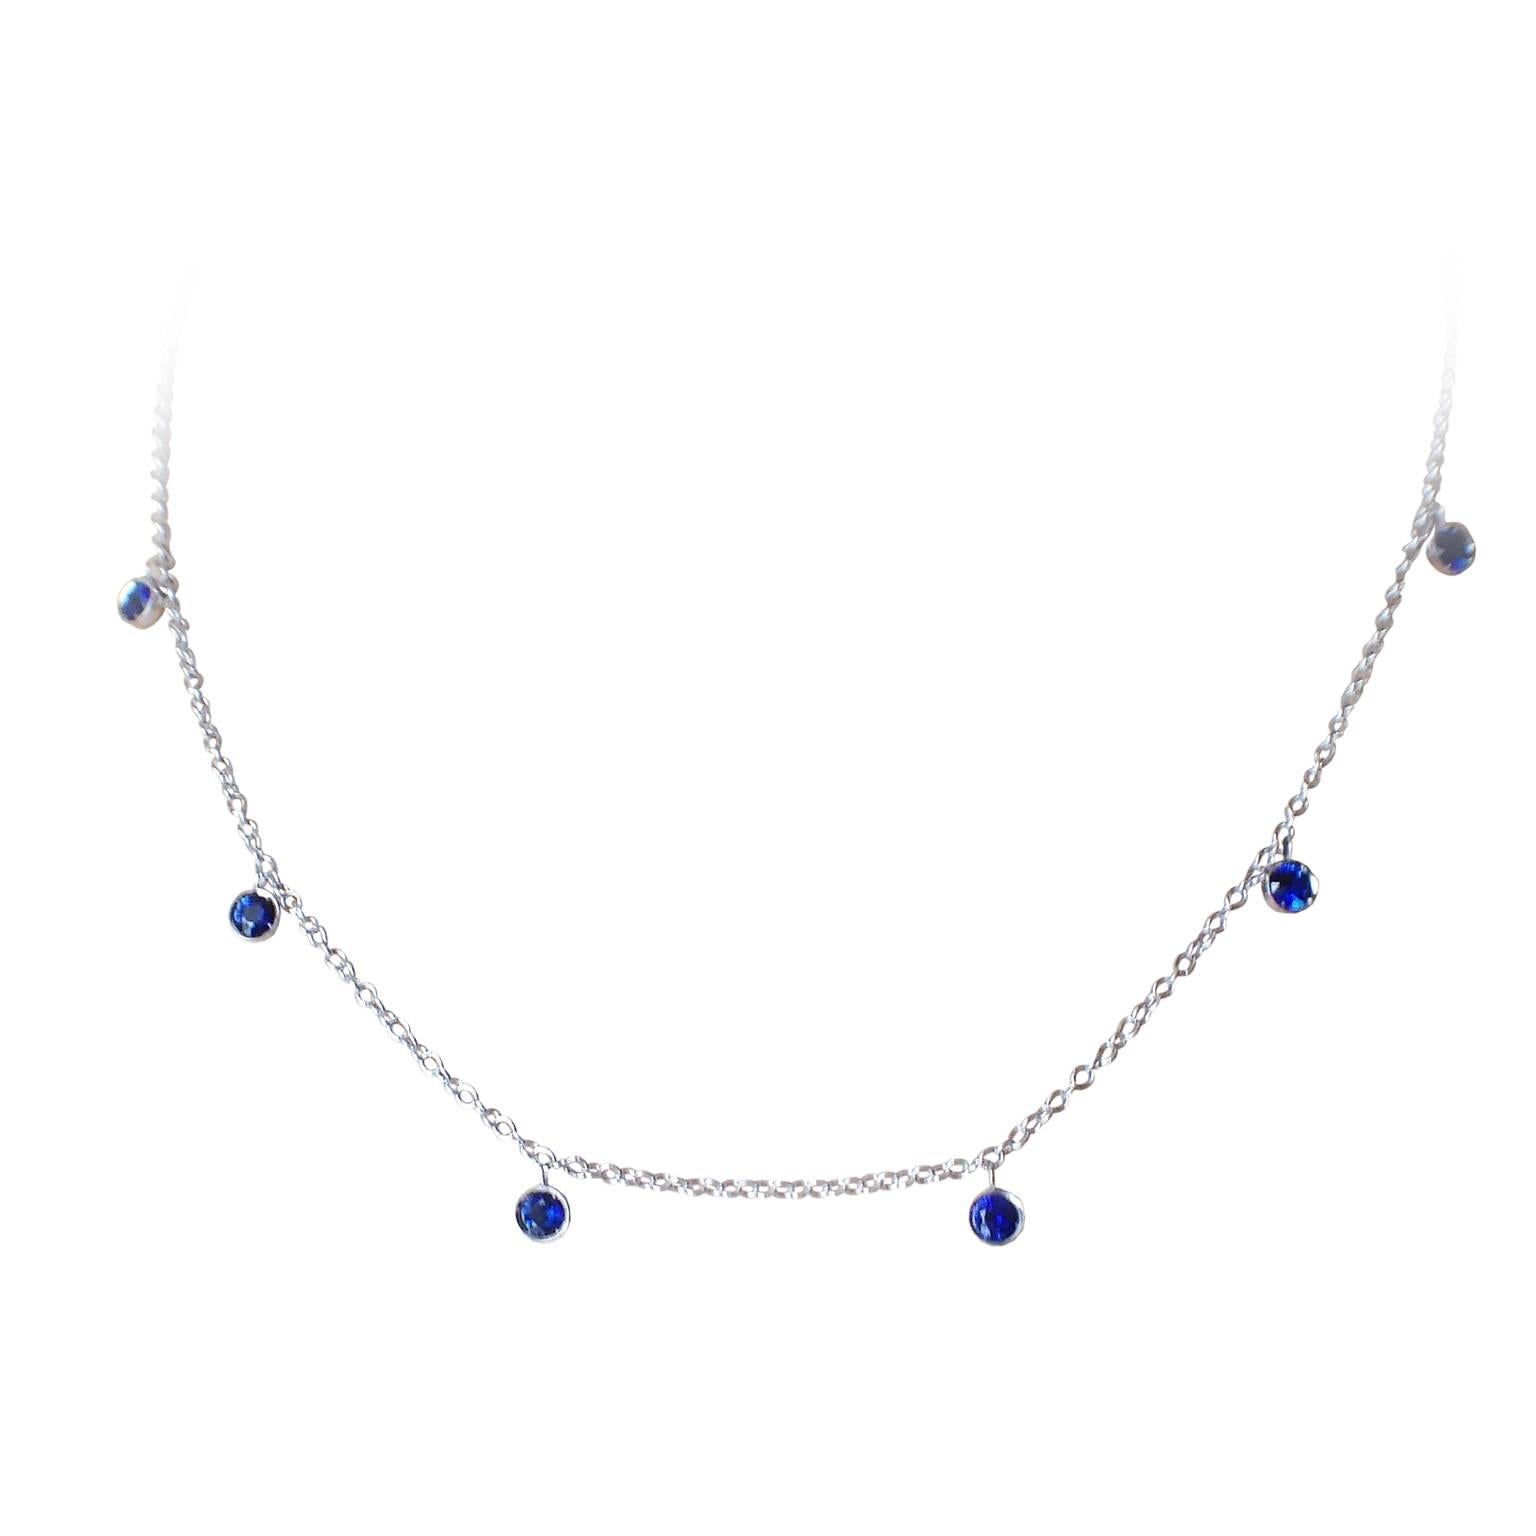 Petronilla Blue Sapphire 18 Karat White Gold Necklace Made in Italy